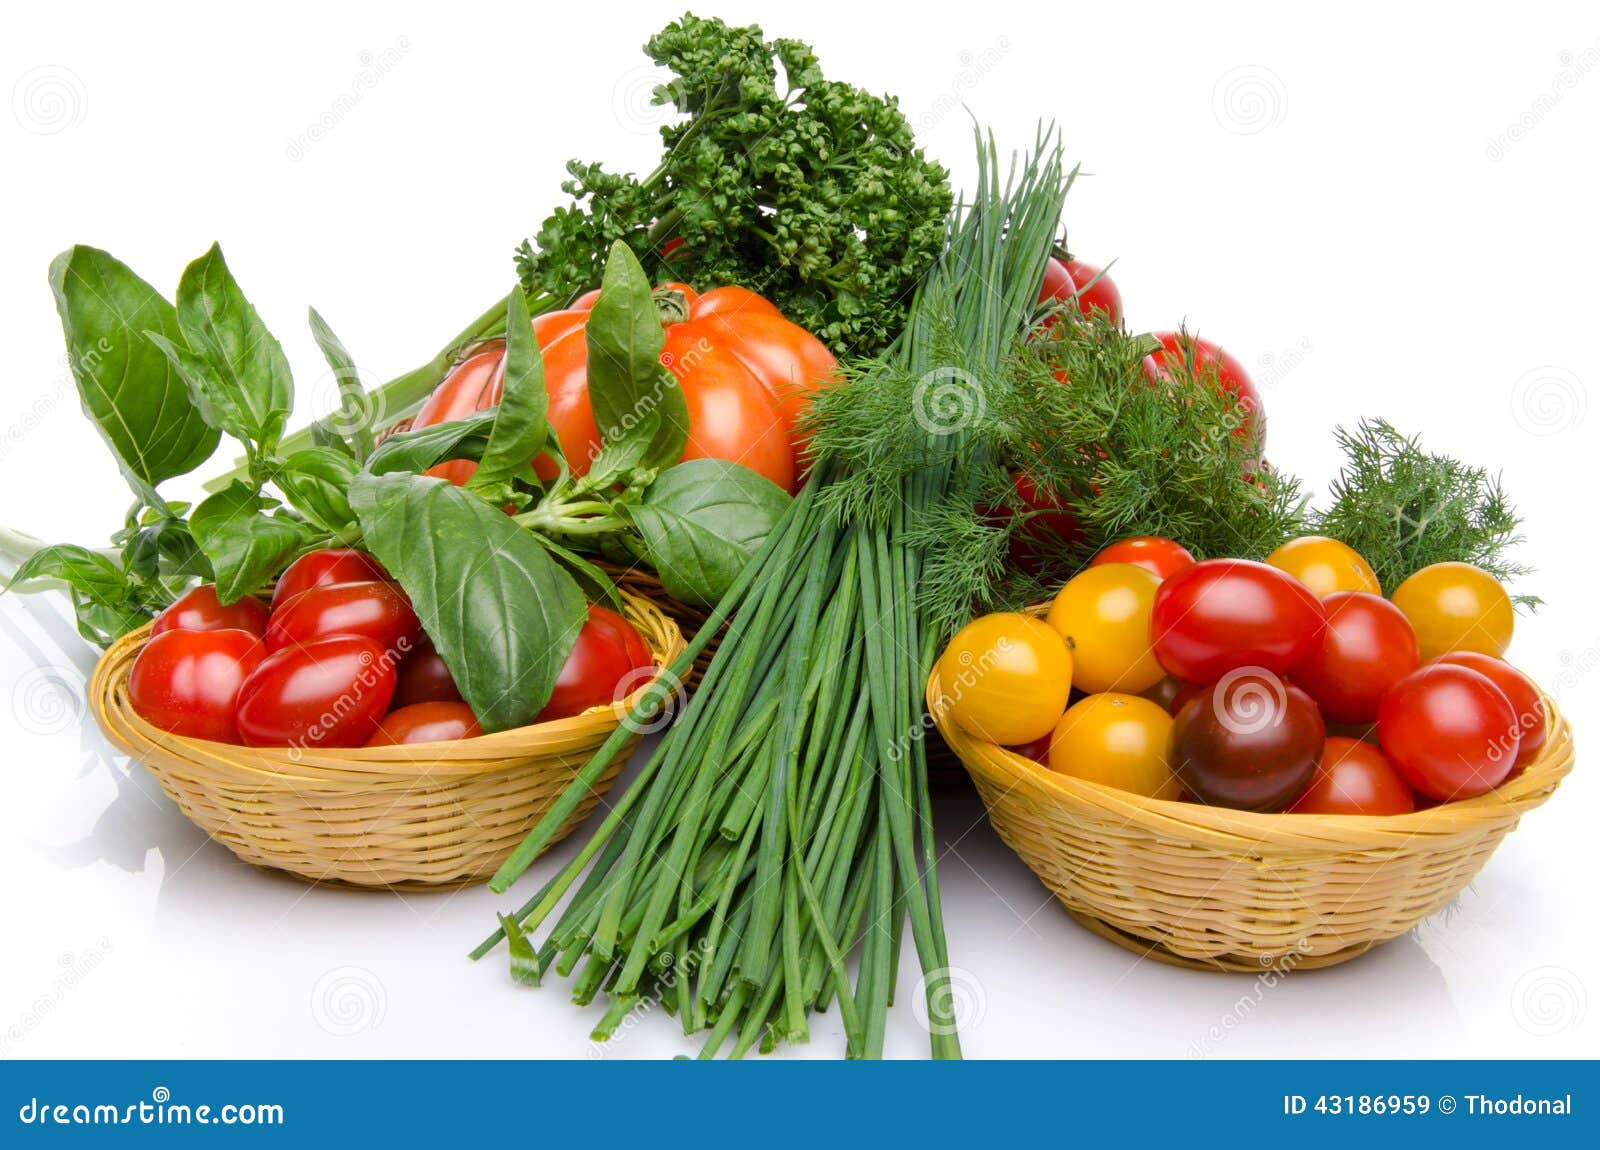 Composition of Different Varieties of Tomatoes with Herbs Stock Image ...